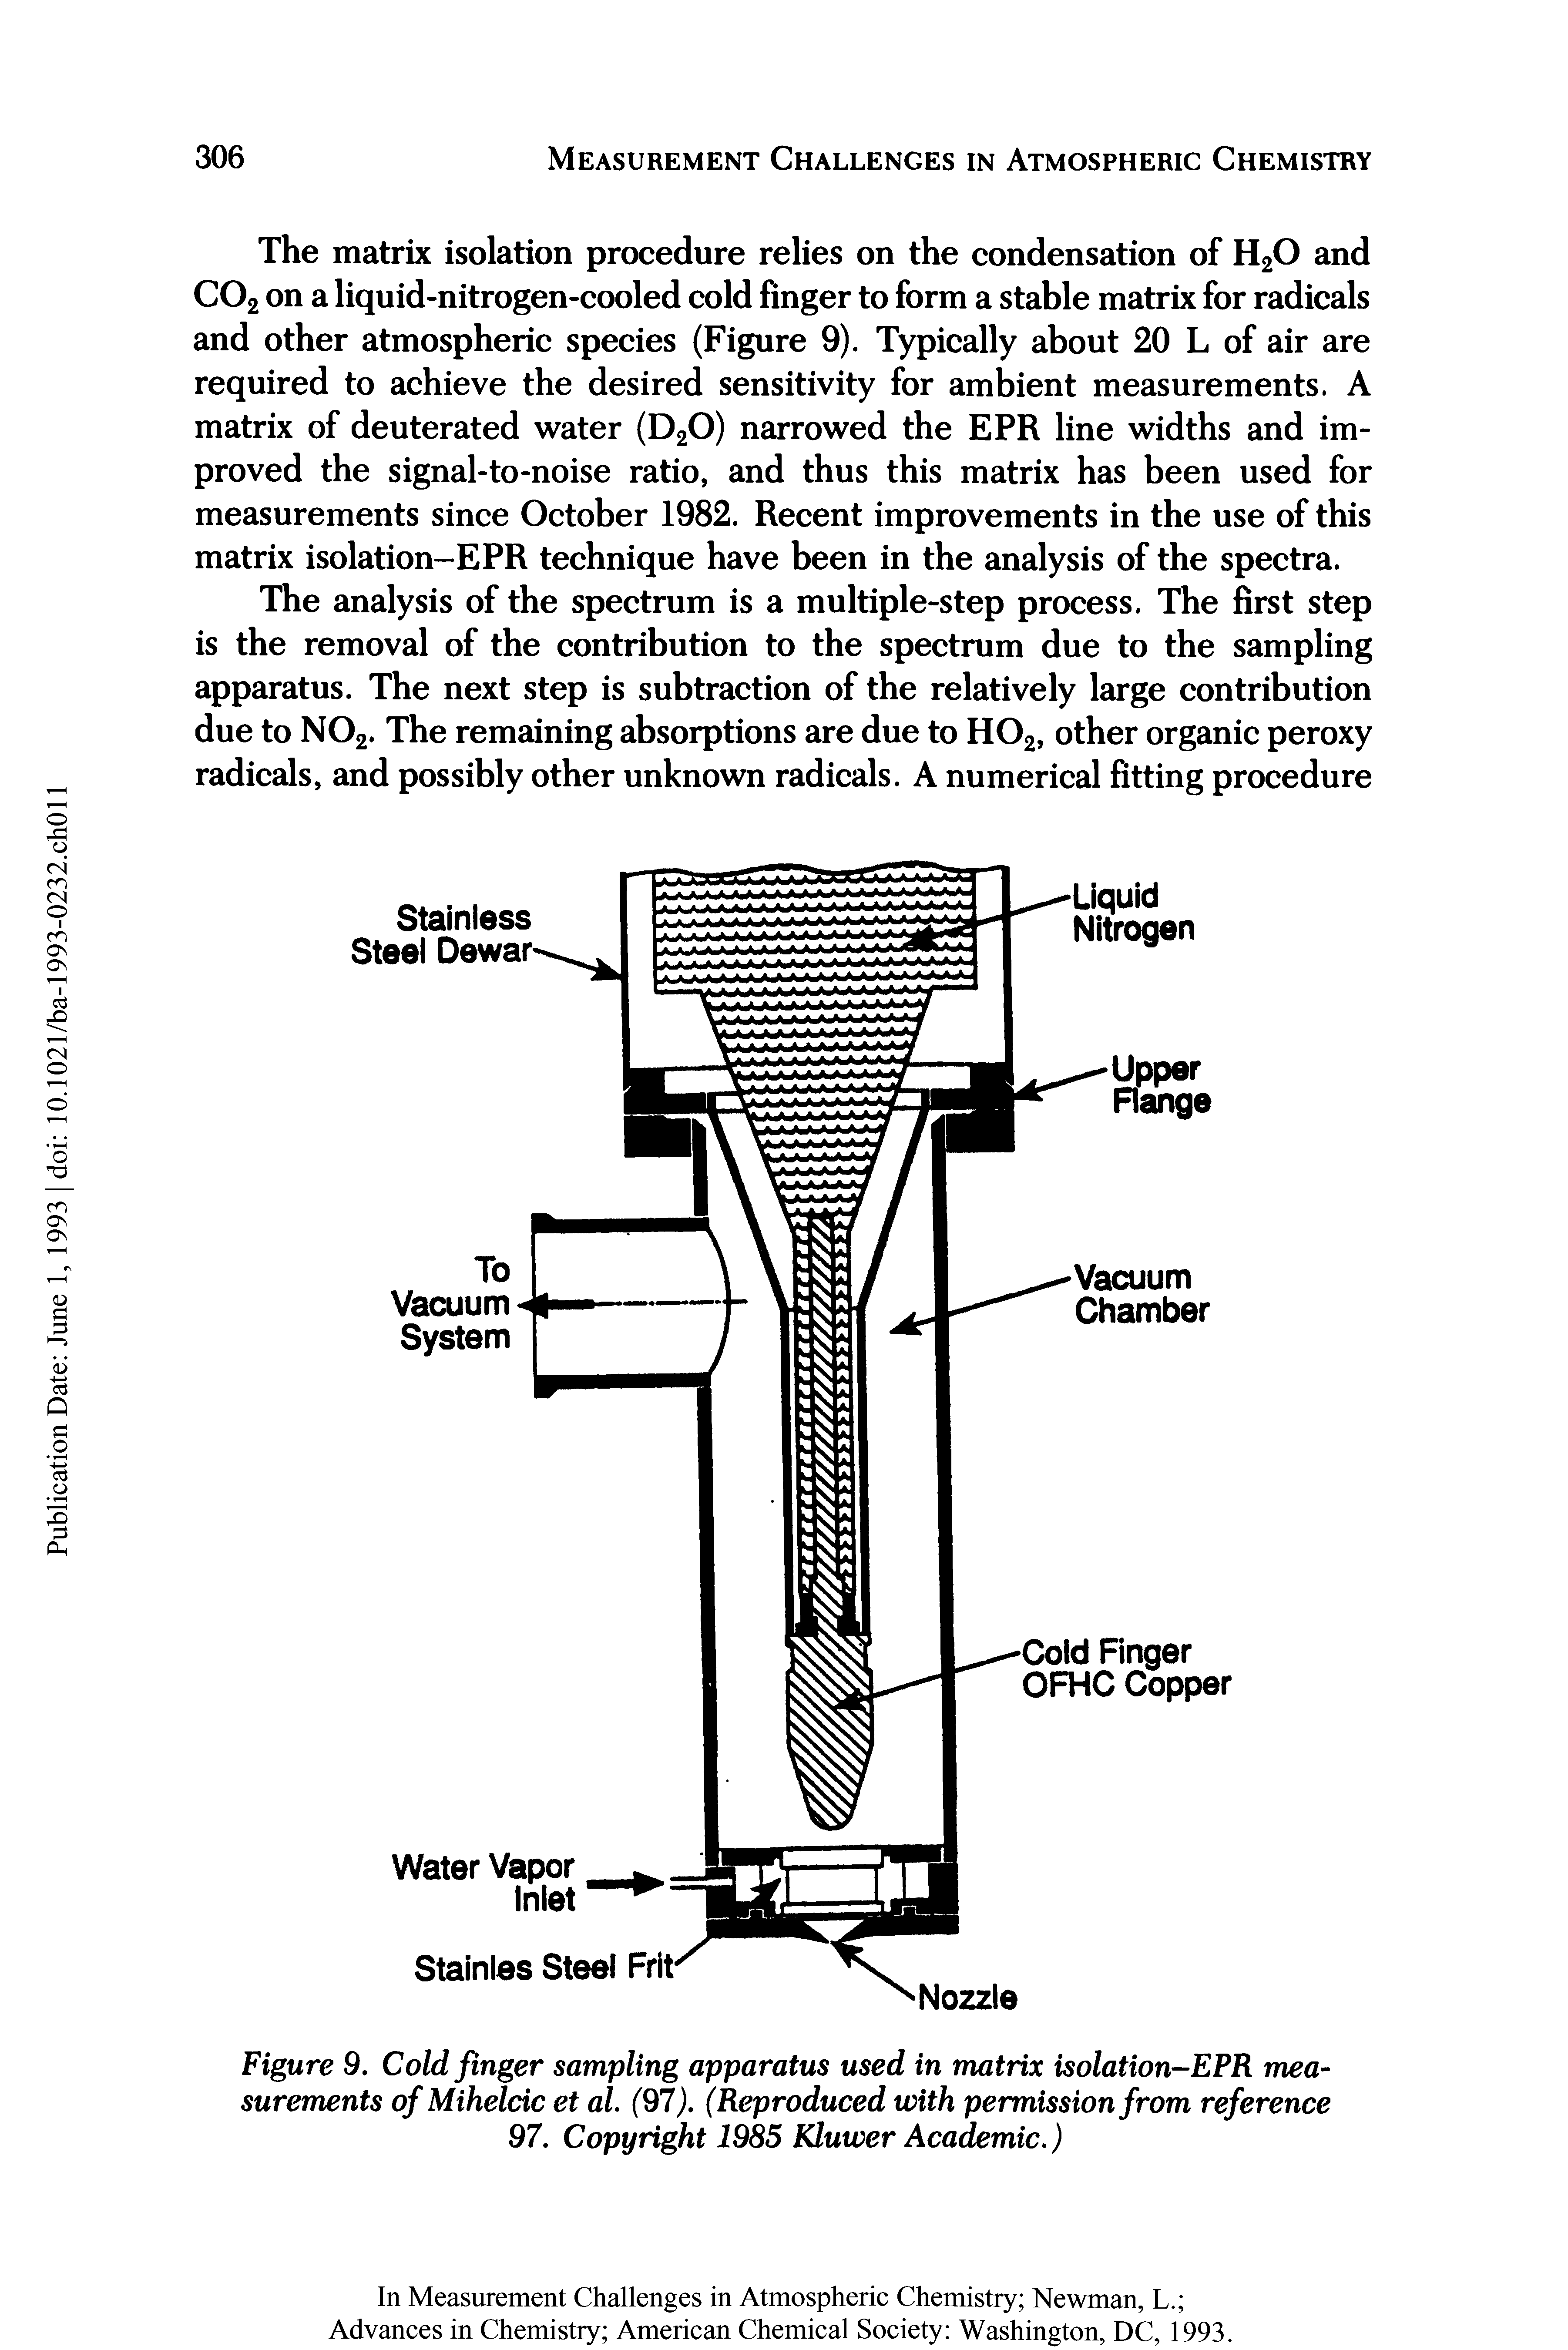 Figure 9. Cold finger sampling apparatus used in matrix isolation-EPR measurements of Mihelcic et al. (97). (Reproduced with permission from reference 97. Copyright 1985 Kluwer Academic.)...